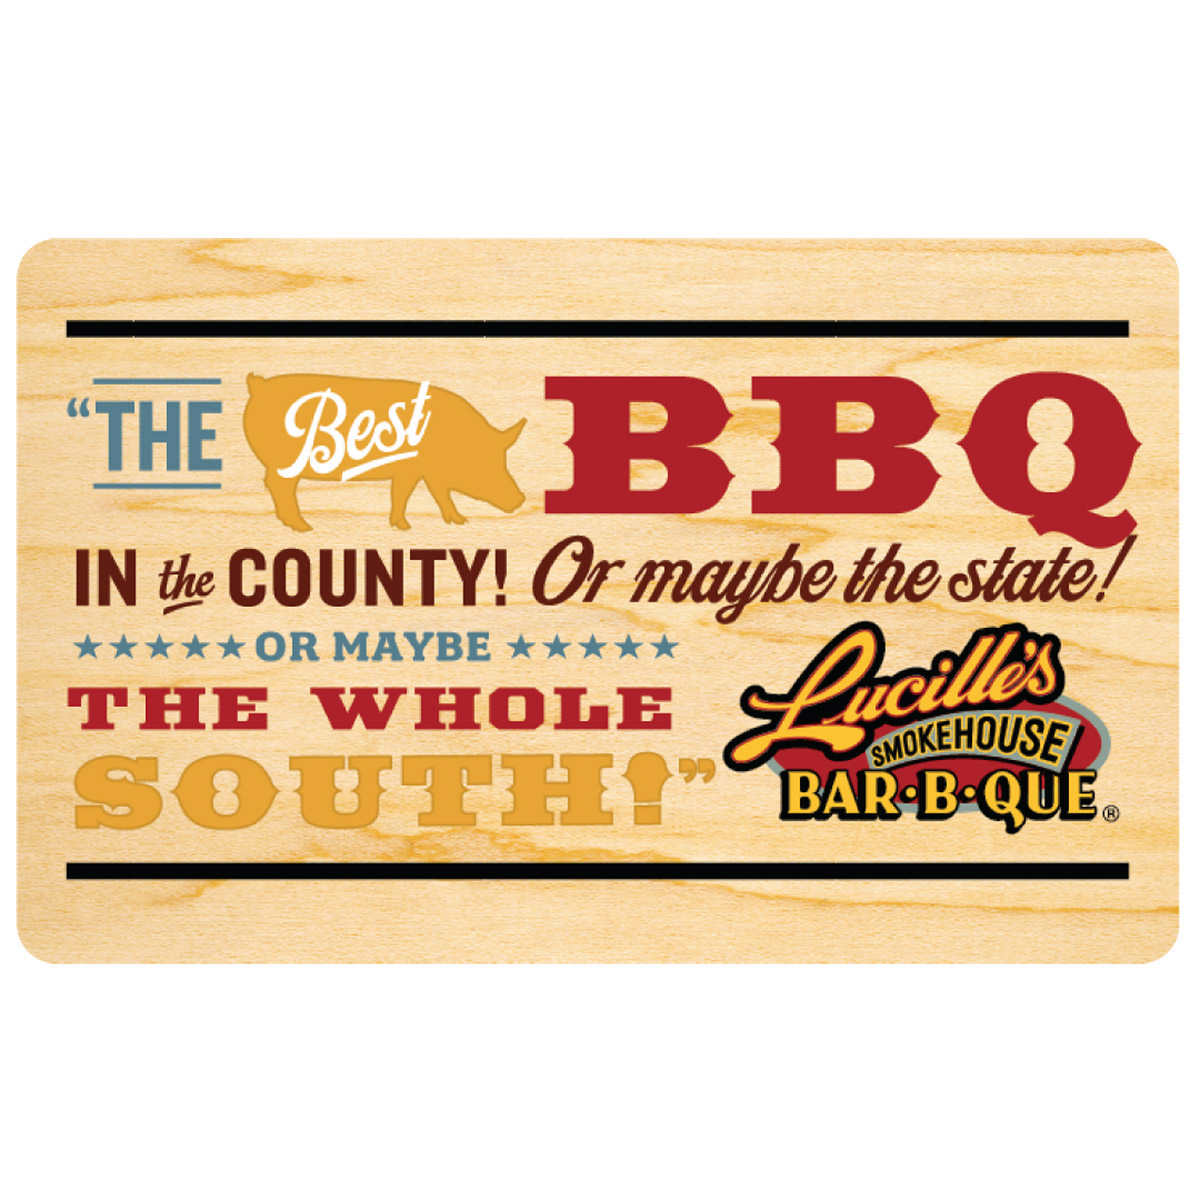 Lucille S Smokehouse Bar B Que Two 50 Gift Cards Costco